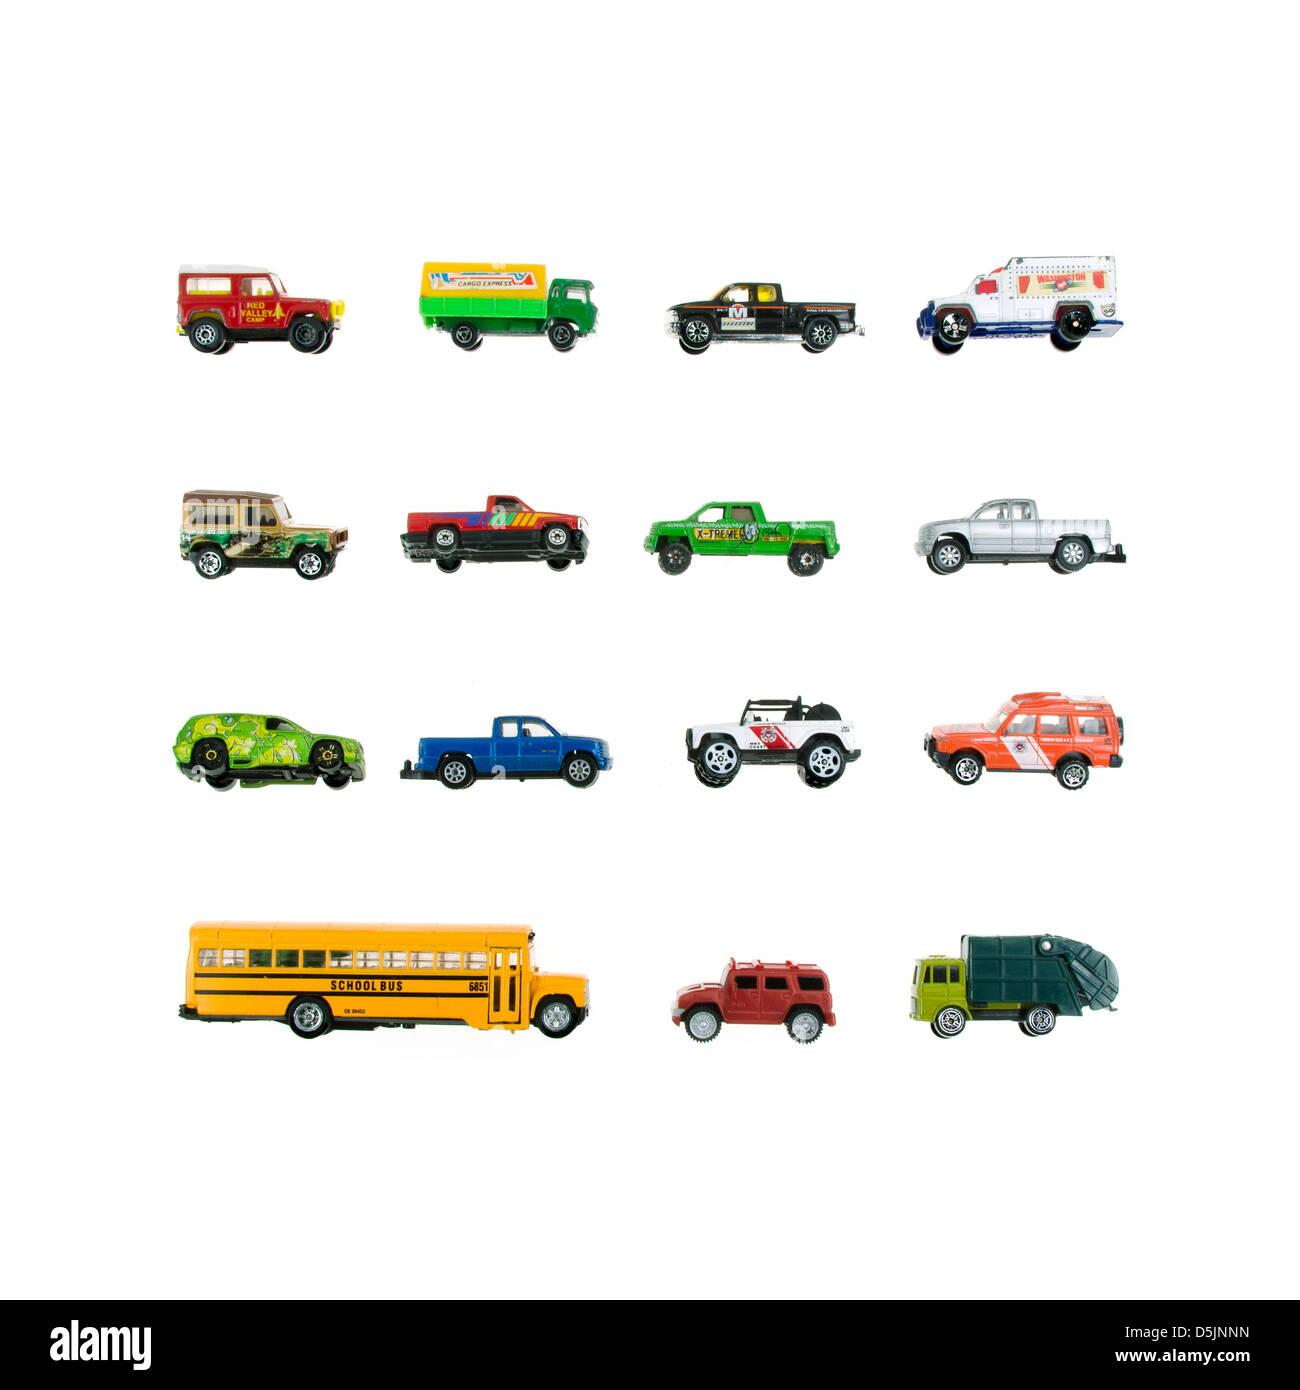 Toy trucks arranged in a grid on a white background. Stock Photo